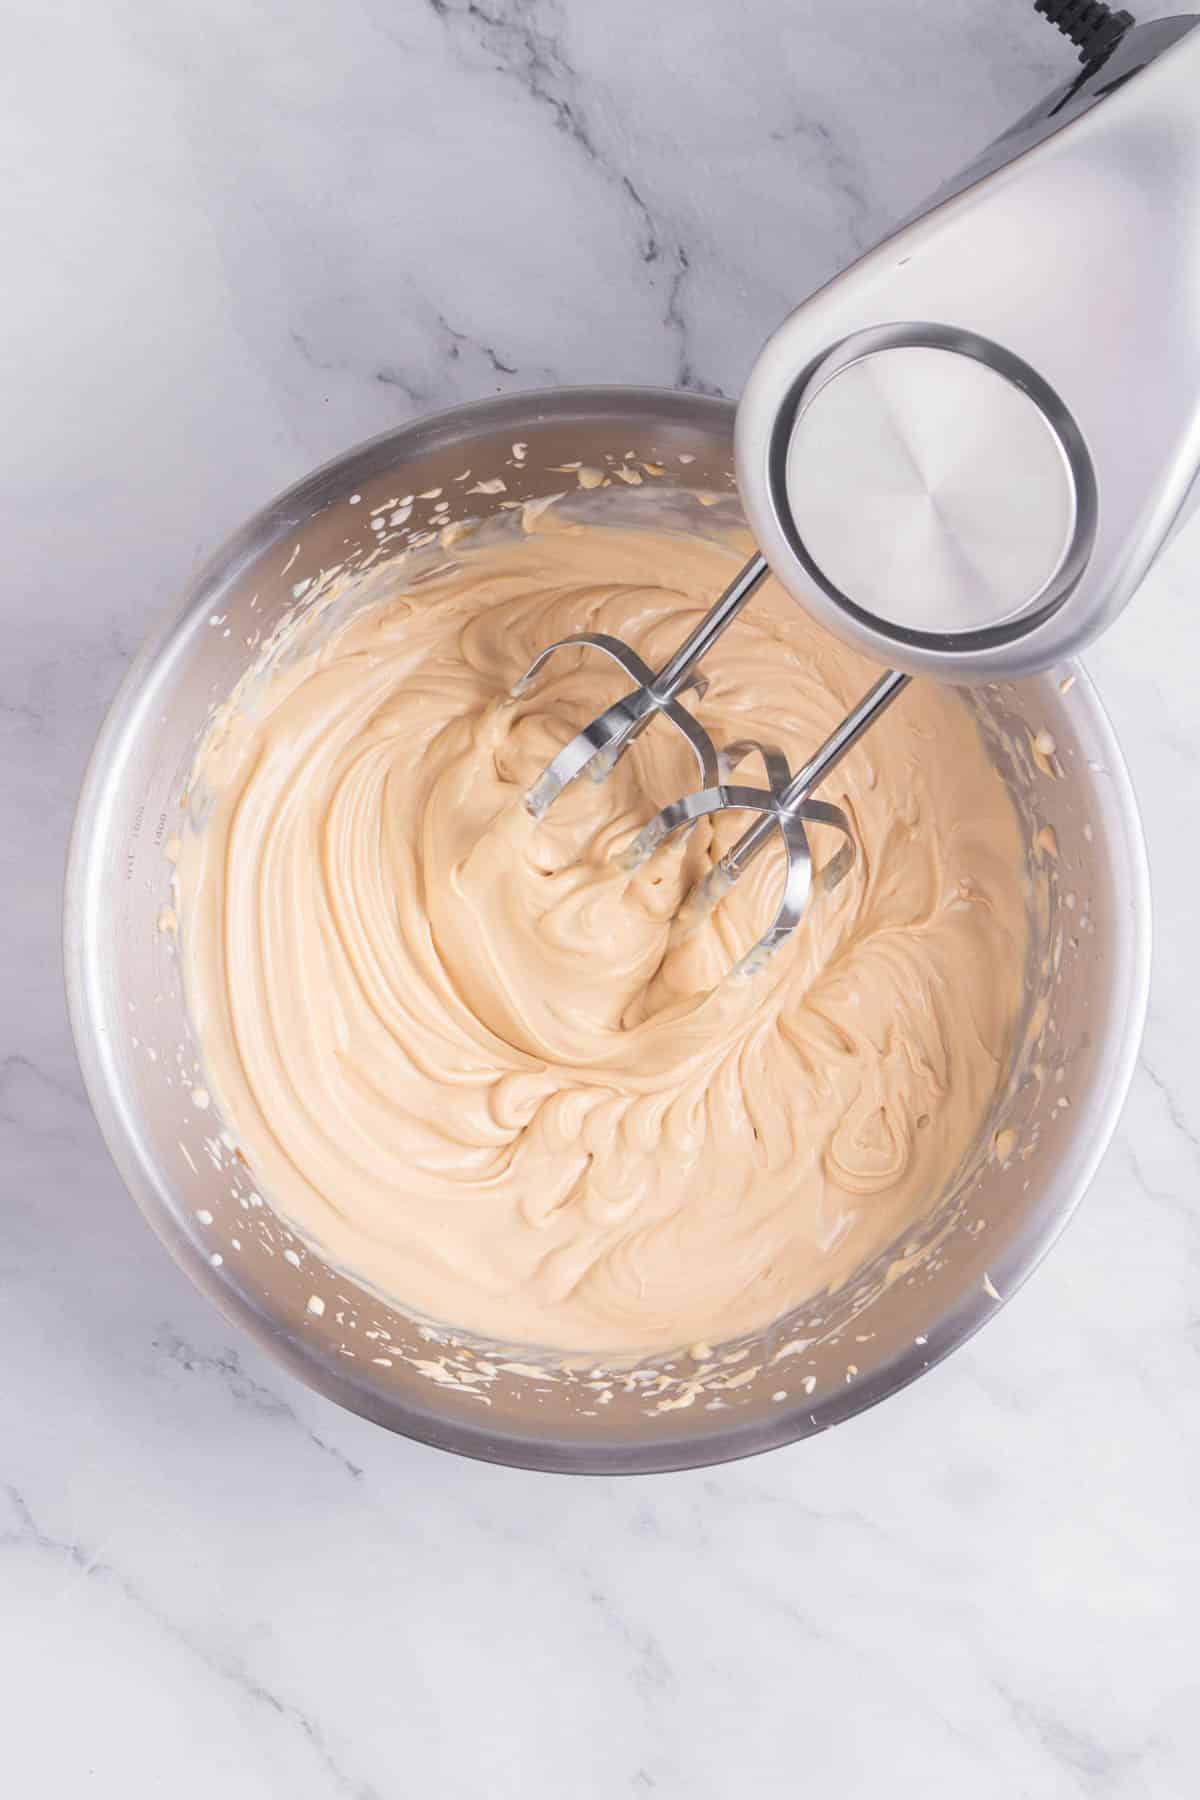 Cheesecake mixture in a stainless bowl.